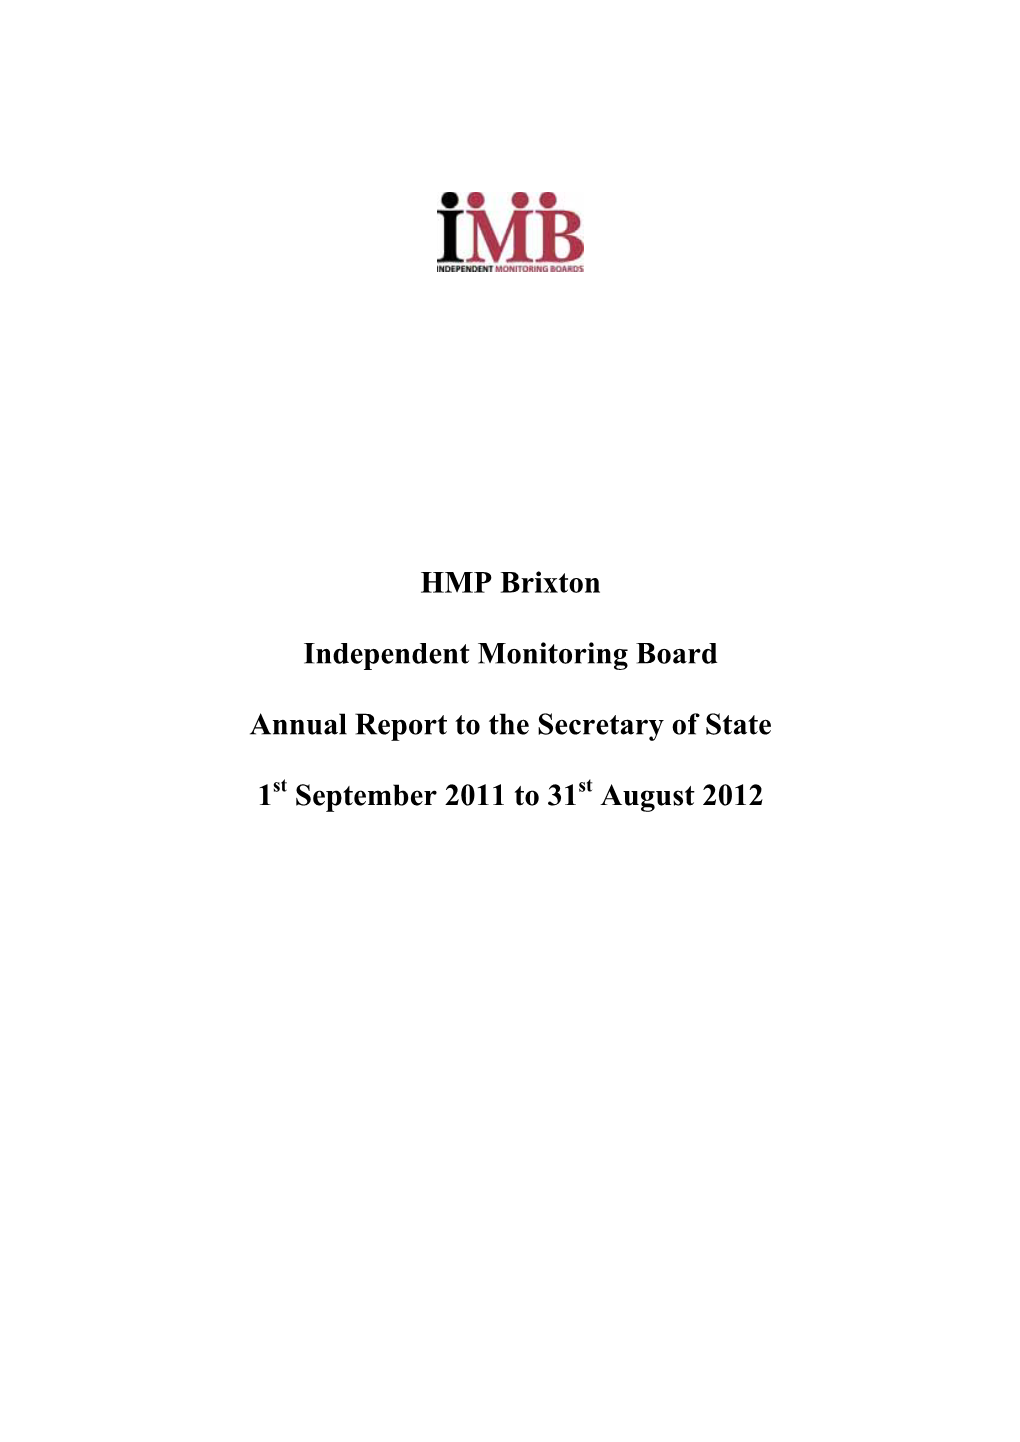 Independent Monitoring Board Annual Report for HMP Brixton 2012